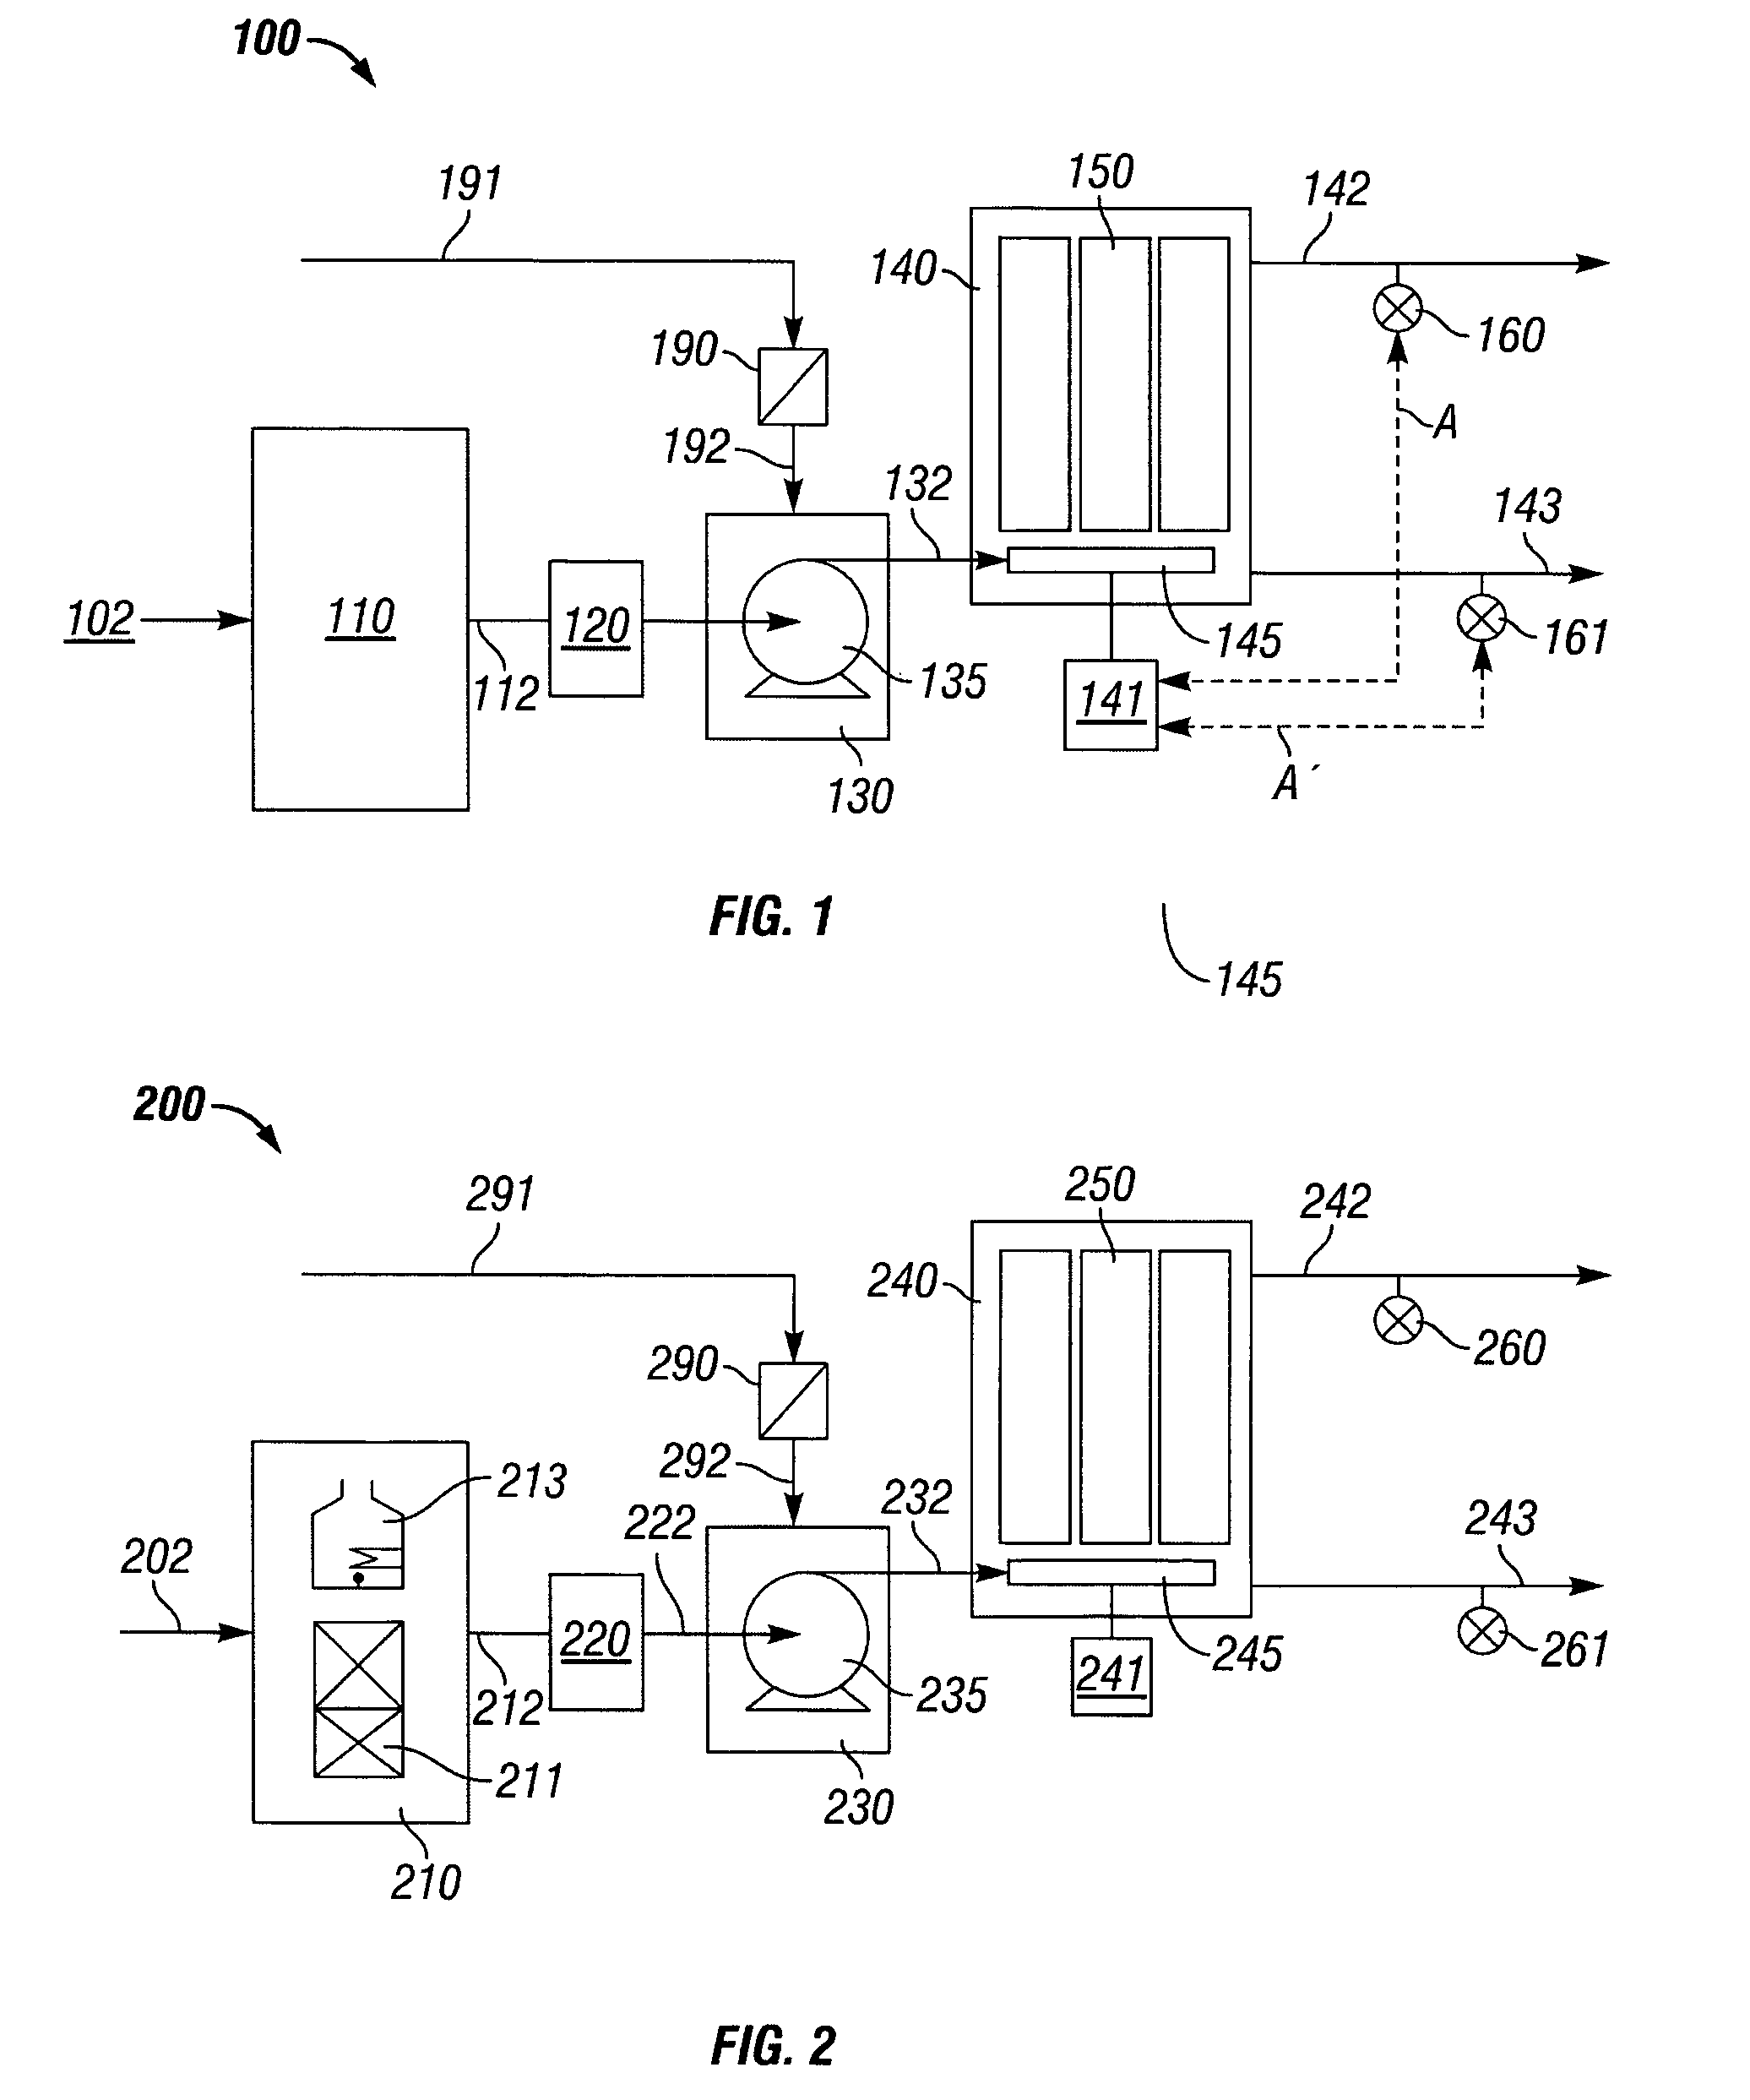 Apparatus and method for controlling compressor motor speed in a hydrogen generator